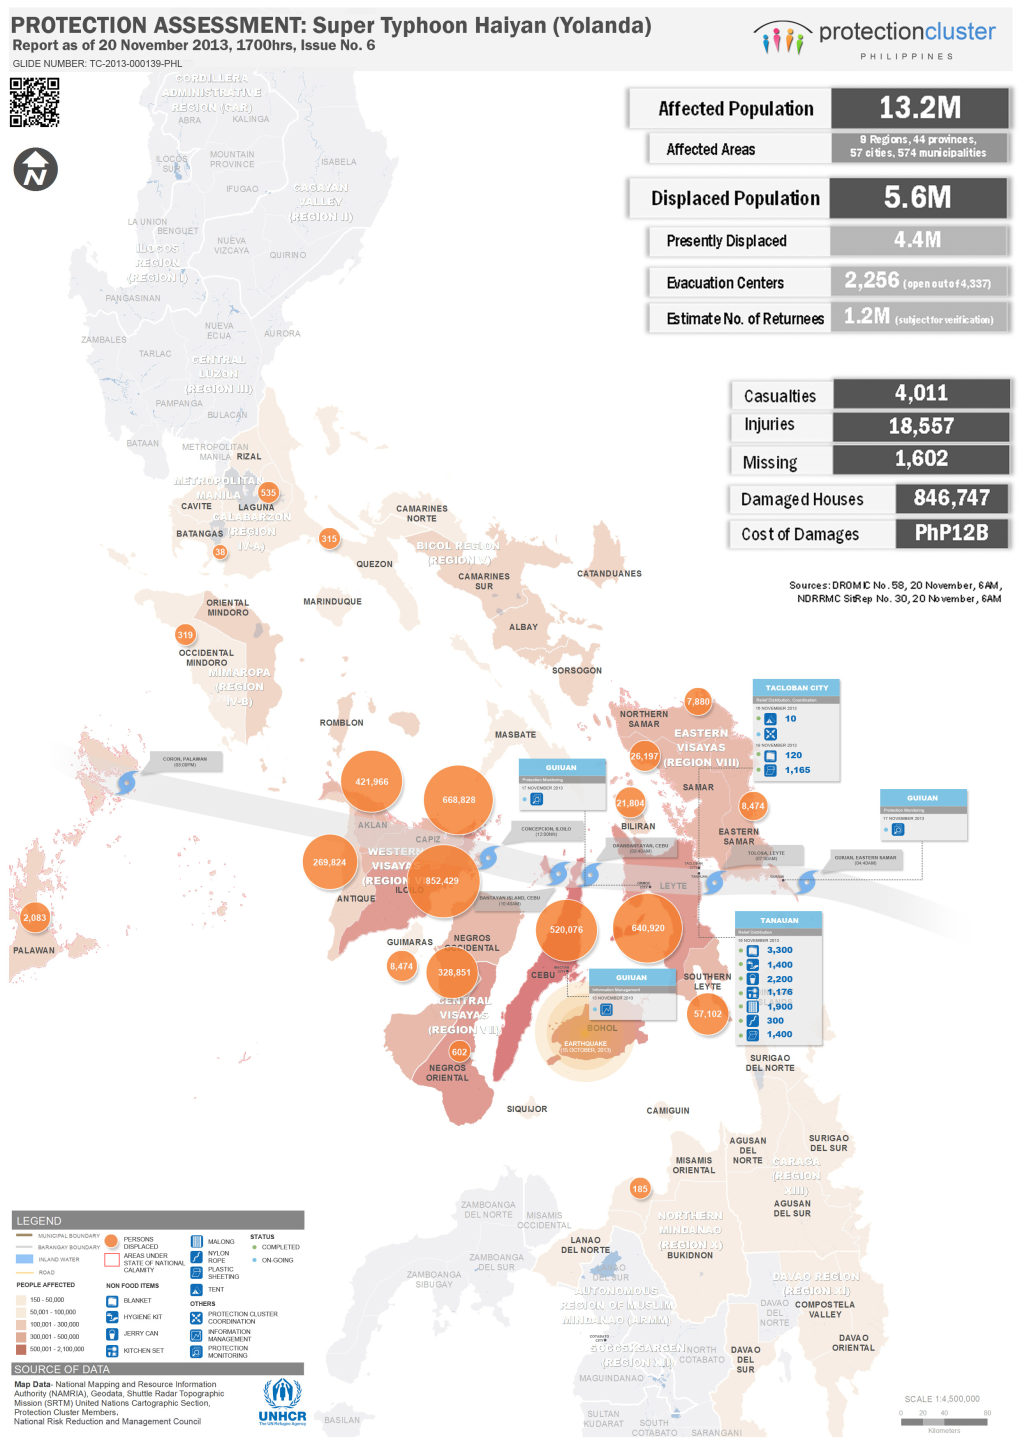 PROTECTION ASSESSMENT: Super Typhoon Haiyan (Yolanda) Report As of 14 November 2013, 1700 Hrs, Issue No